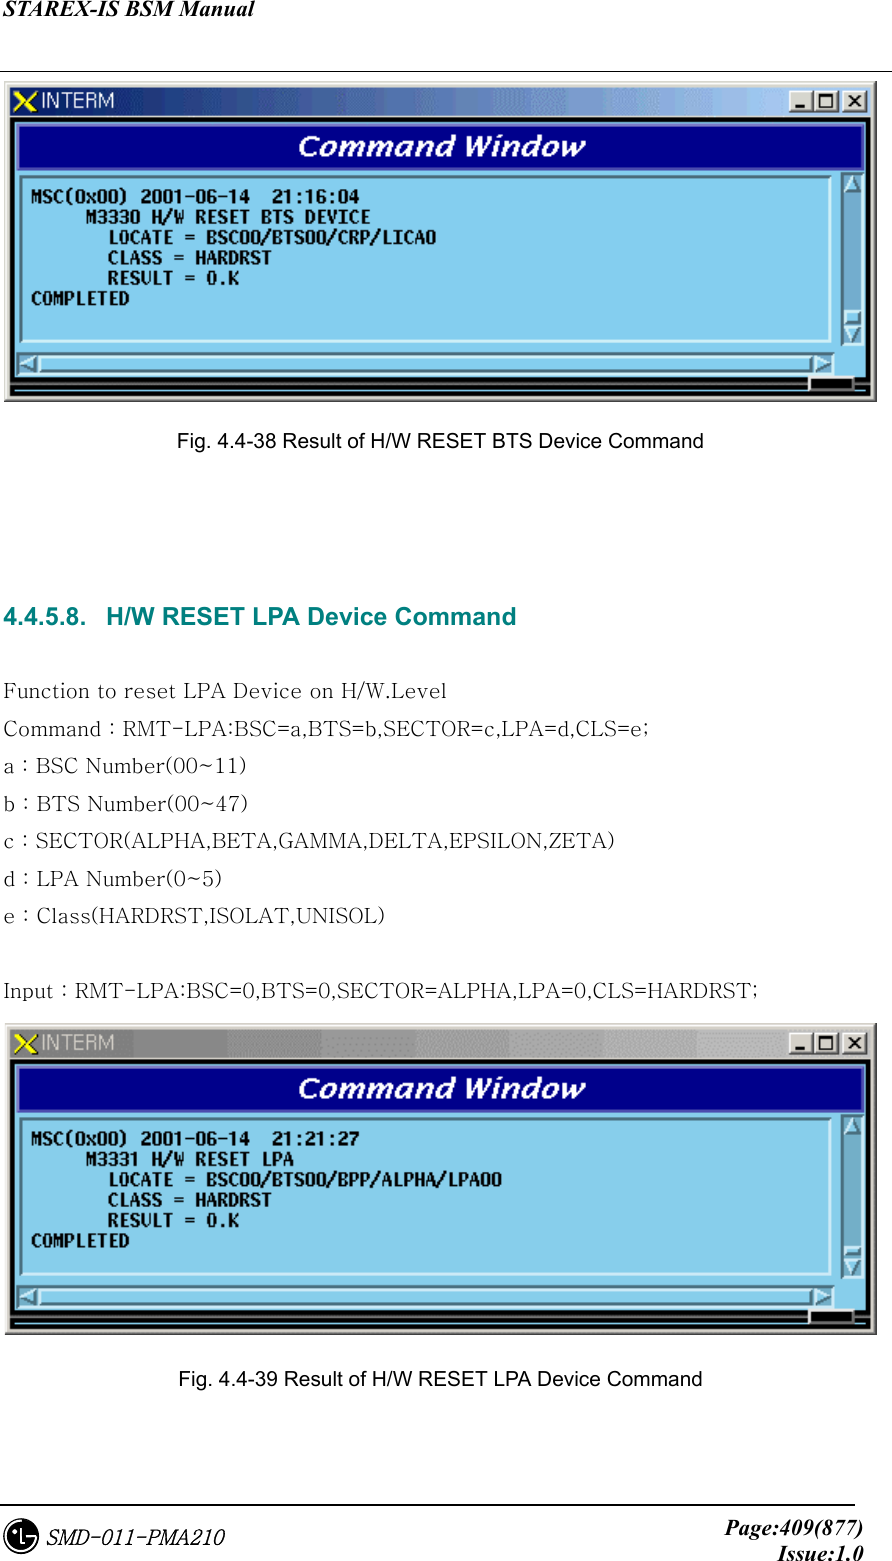 STAREX-IS BSM Manual     Page:409(877)Issue:1.0SMD-011-PMA210  Fig. 4.4-38 Result of H/W RESET BTS Device Command    4.4.5.8.   H/W RESET LPA Device Command  Function to reset LPA Device on H/W.Level Command : RMT-LPA:BSC=a,BTS=b,SECTOR=c,LPA=d,CLS=e; a : BSC Number(00~11) b : BTS Number(00~47) c : SECTOR(ALPHA,BETA,GAMMA,DELTA,EPSILON,ZETA) d : LPA Number(0~5) e : Class(HARDRST,ISOLAT,UNISOL)  Input : RMT-LPA:BSC=0,BTS=0,SECTOR=ALPHA,LPA=0,CLS=HARDRST;  Fig. 4.4-39 Result of H/W RESET LPA Device Command  